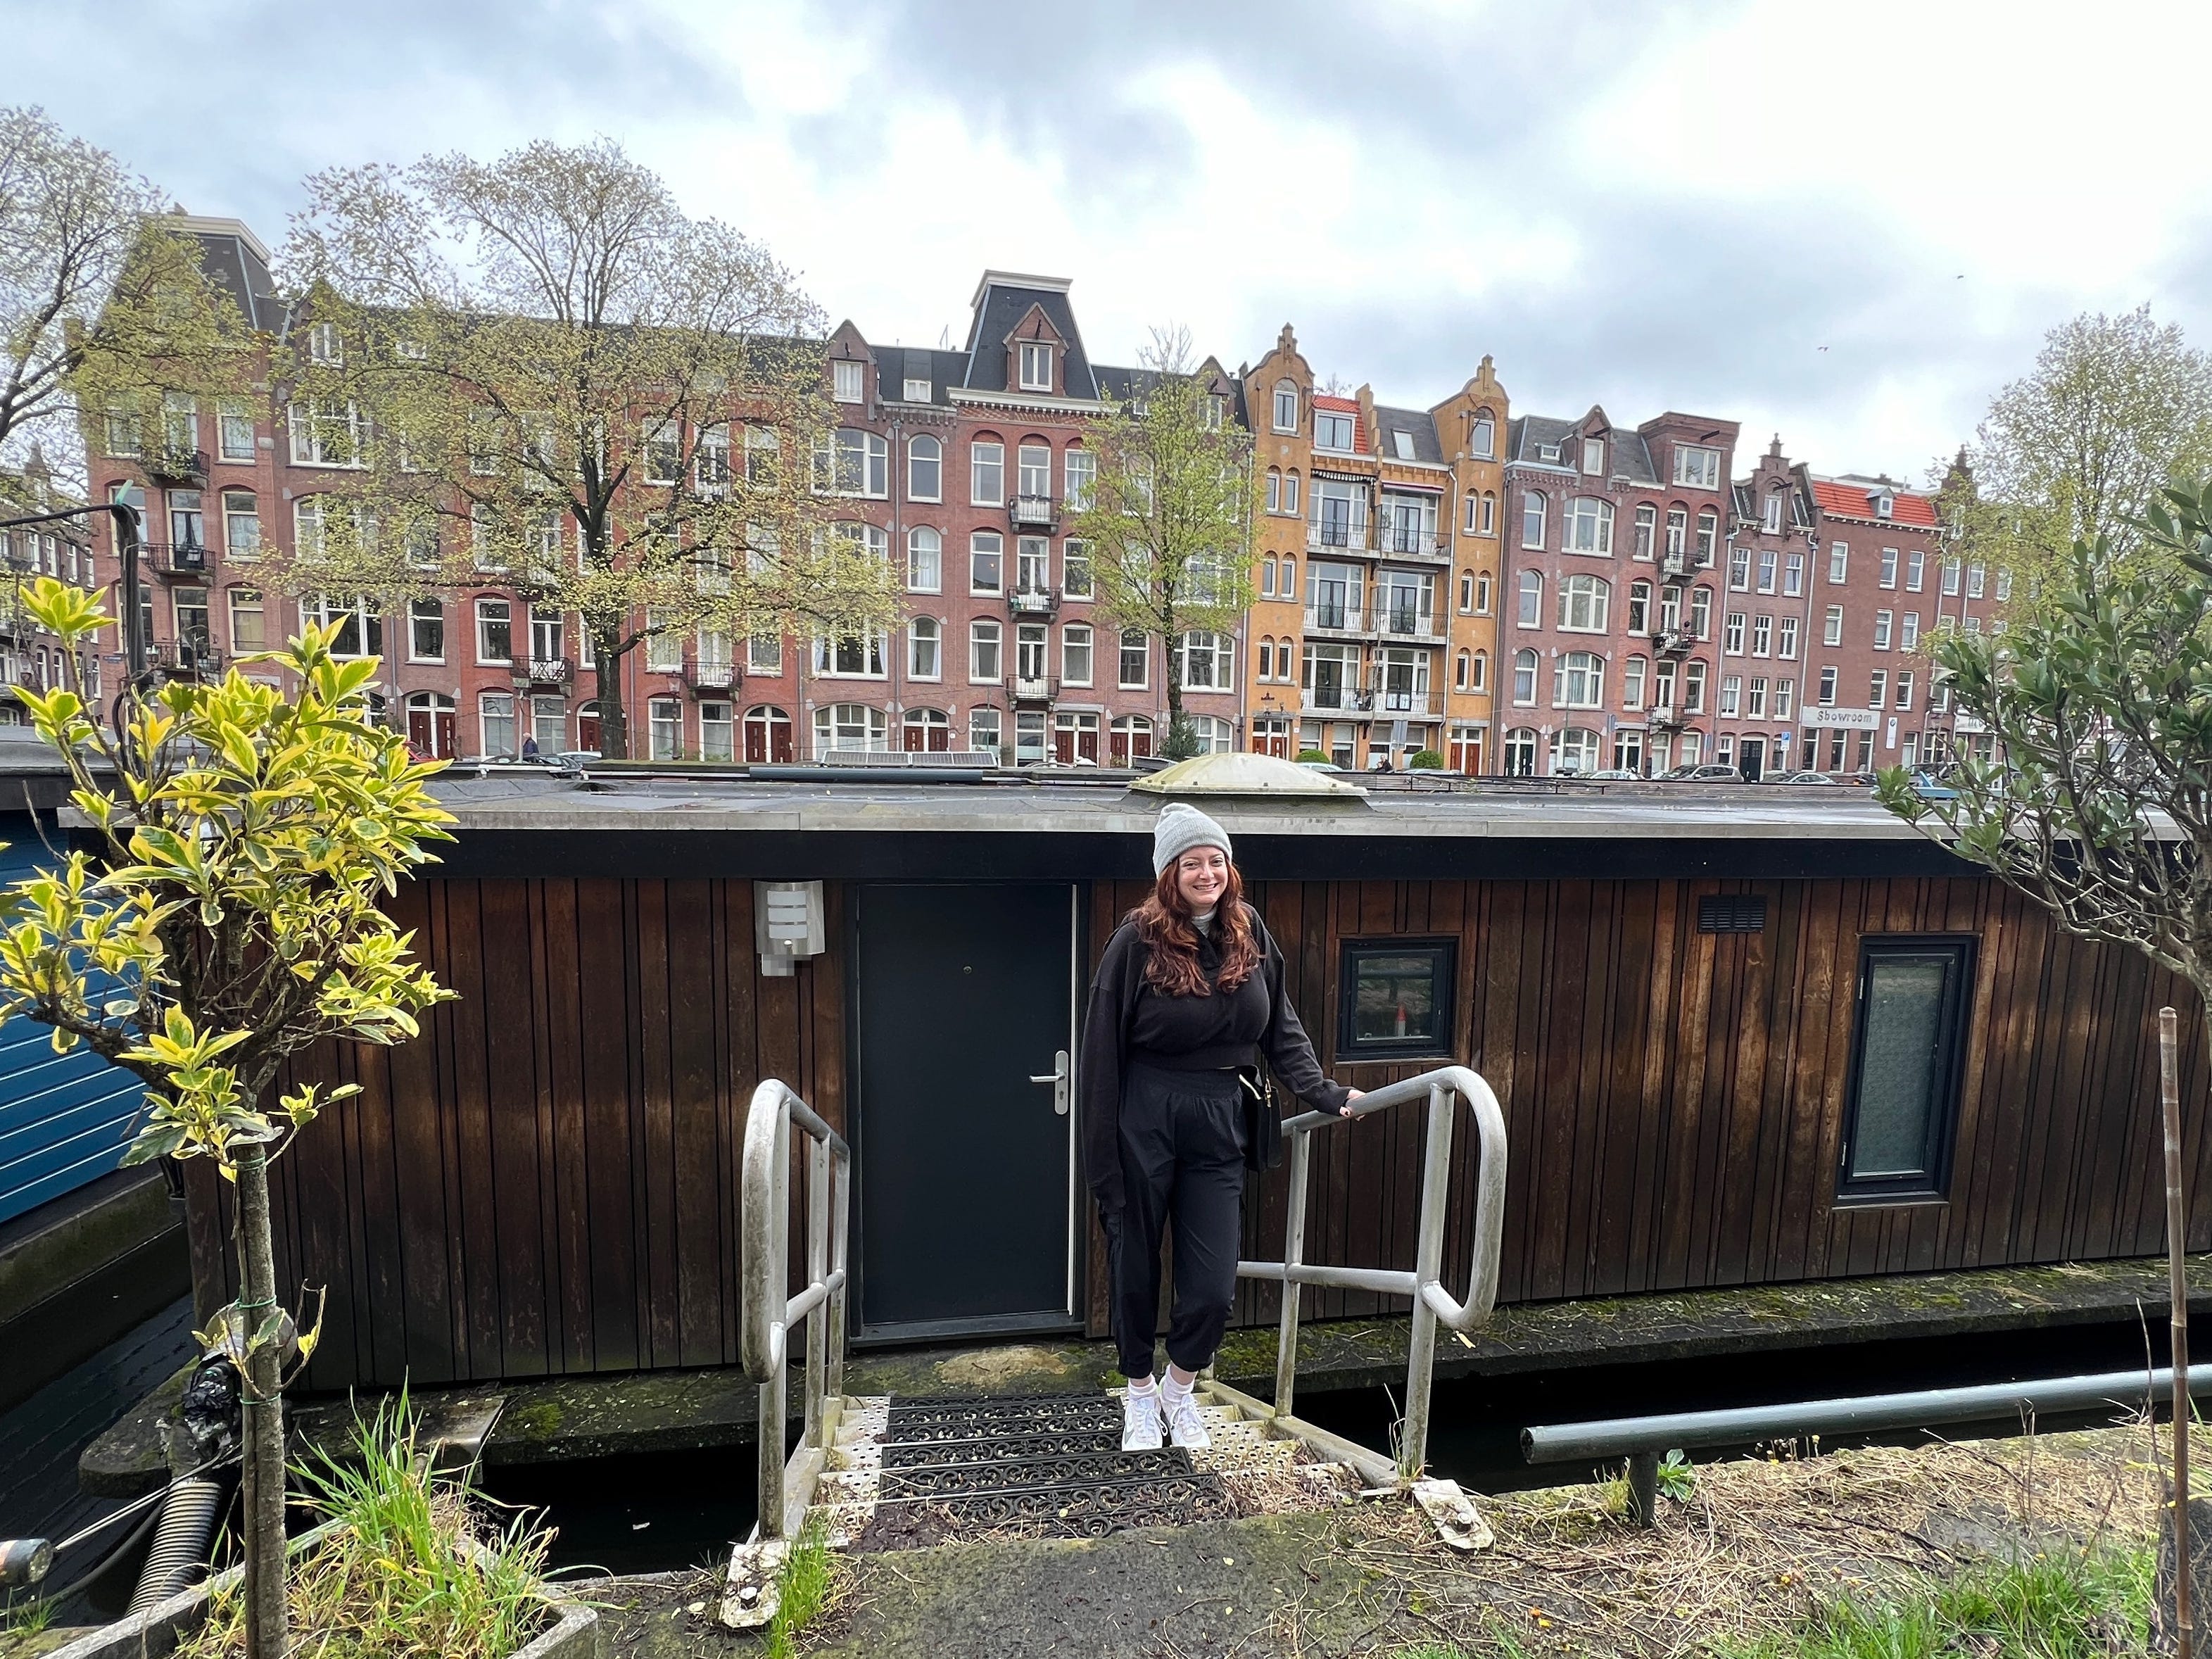 <ul class="summary-list"><li>I stayed in a houseboat in <a href="https://www.businessinsider.com/category/amsterdam">Amsterdam</a> for four nights.</li><li>The houseboat cost $2,802.55 after taxes and fees, or roughly $700 per night on Airbnb.</li><li>Even though it was on the pricier side, it was worth it to live like a local for a few days.</li></ul><p>One of the first things you notice about Amsterdam when you visit is that there are canals everywhere — and in many of those canals are <a href="https://www.businessinsider.com/photos-houseboat-interiors-2020-6">houseboats</a>.</p><p>When I took a trip in April 2024 with my parents to visit my brother studying abroad, I knew I wanted to stay in a houseboat for at least part of our trip since houseboats are so distinctly Dutch.</p><p>The Dutch have lived on boats as early as the 17th century. As the <a href="https://www.washingtonpost.com/climate-solutions/interactive/2021/amsterdam-floating-houses-schoonschip/">Washington Post</a> noted, the Netherlands is "waterlogged" — one-third of the country is below sea level, and efforts to drain water from the land date back to the Middle Ages.</p><p><a href="https://www.nytimes.com/2019/11/04/realestate/in-amsterdam-floating-homes-that-only-look-like-ships.html">The New York Times</a> reported there are about 10,000 houseboats in the Netherlands, and 2,500 of them are in Amsterdam. The space in an Amsterdam canal alone — that is, without a boat — costs nearly $500,000.</p><p>And houseboats themselves are only getting more expensive. Real-estate agent Jon Kok told the Times in 2019 that the prices of houseboats had increased between 30 and 40 percent in the five years prior.</p><p>Over the course of 10 days in Amsterdam, I stayed in two <a href="https://www.businessinsider.com/airbnb-superhost-uses-real-estate-financial-freedom-2024-4">Airbnbs</a>. Our first was inside an apartment on land, and our second was a houseboat that came to around $700 a night after taxes, cleaning, and service fees.</p><p>Our first Airbnb, which we stayed in for five nights, cost $2,442 in total. It was nice but not too different from the many other Airbnbs I've stayed in.</p><p class="p1">While more expensive, the houseboat was a completely new experience for the four nights. I've never taken a cruise, so this was the first time I've ever slept on the water. I was nervous about potentially getting seasick but decided the uniqueness of staying on a houseboat outweighed the potential nausea, which I thankfully didn't experience.</p><p>Here's what it was like to stay in an Amsterdammer's houseboat.</p><div class="read-original">Read the original article on <a href="https://www.businessinsider.com/photos-amsterdam-airbnb-houseboat-2024-4">Business Insider</a></div>